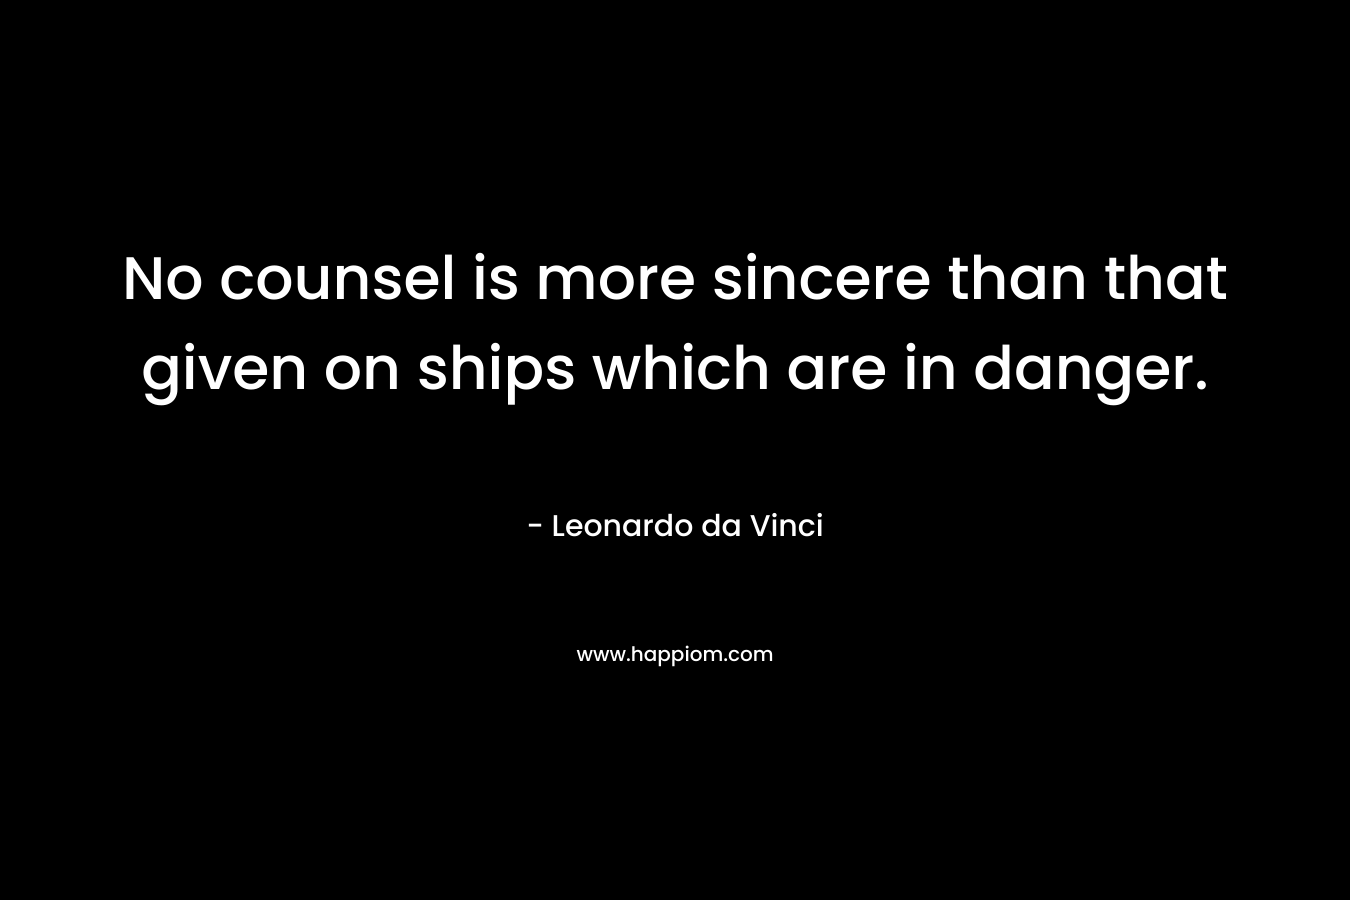 No counsel is more sincere than that given on ships which are in danger. – Leonardo da Vinci